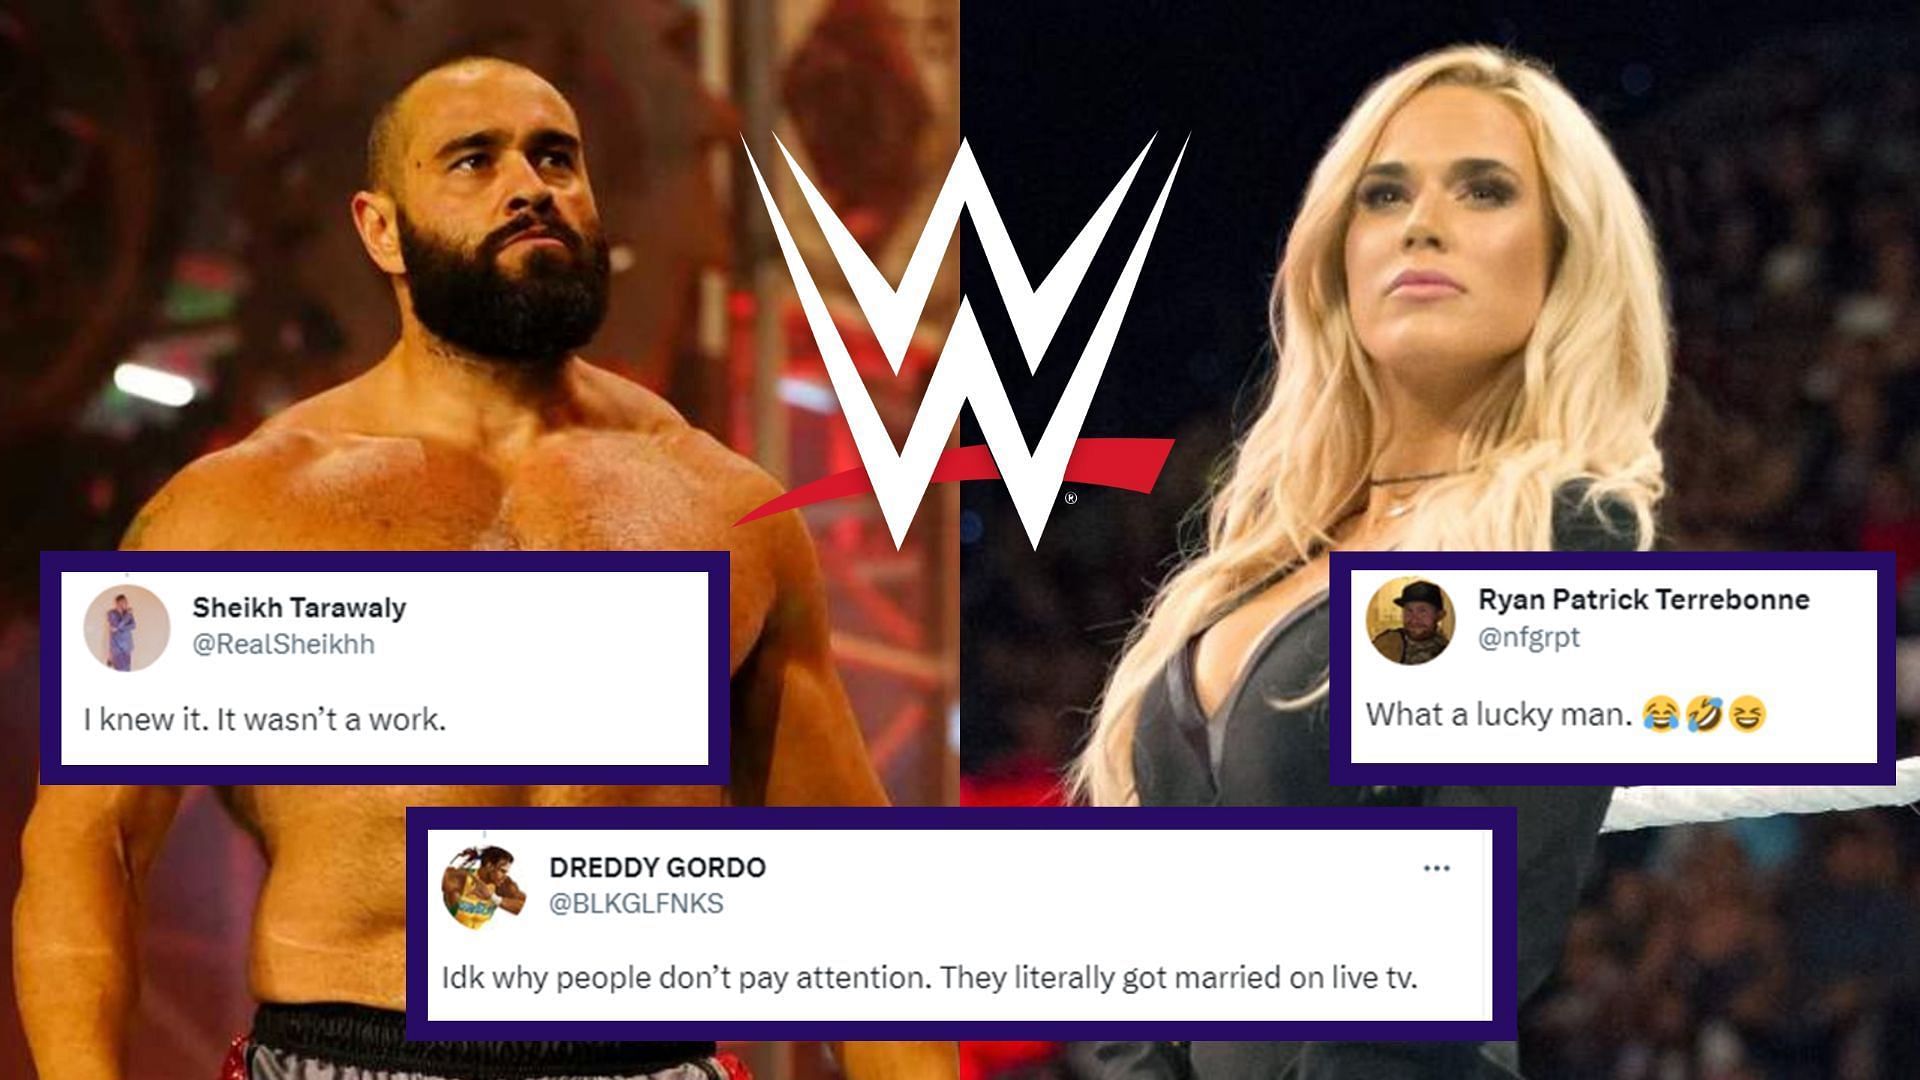 What is going on between this wrestling power couple?